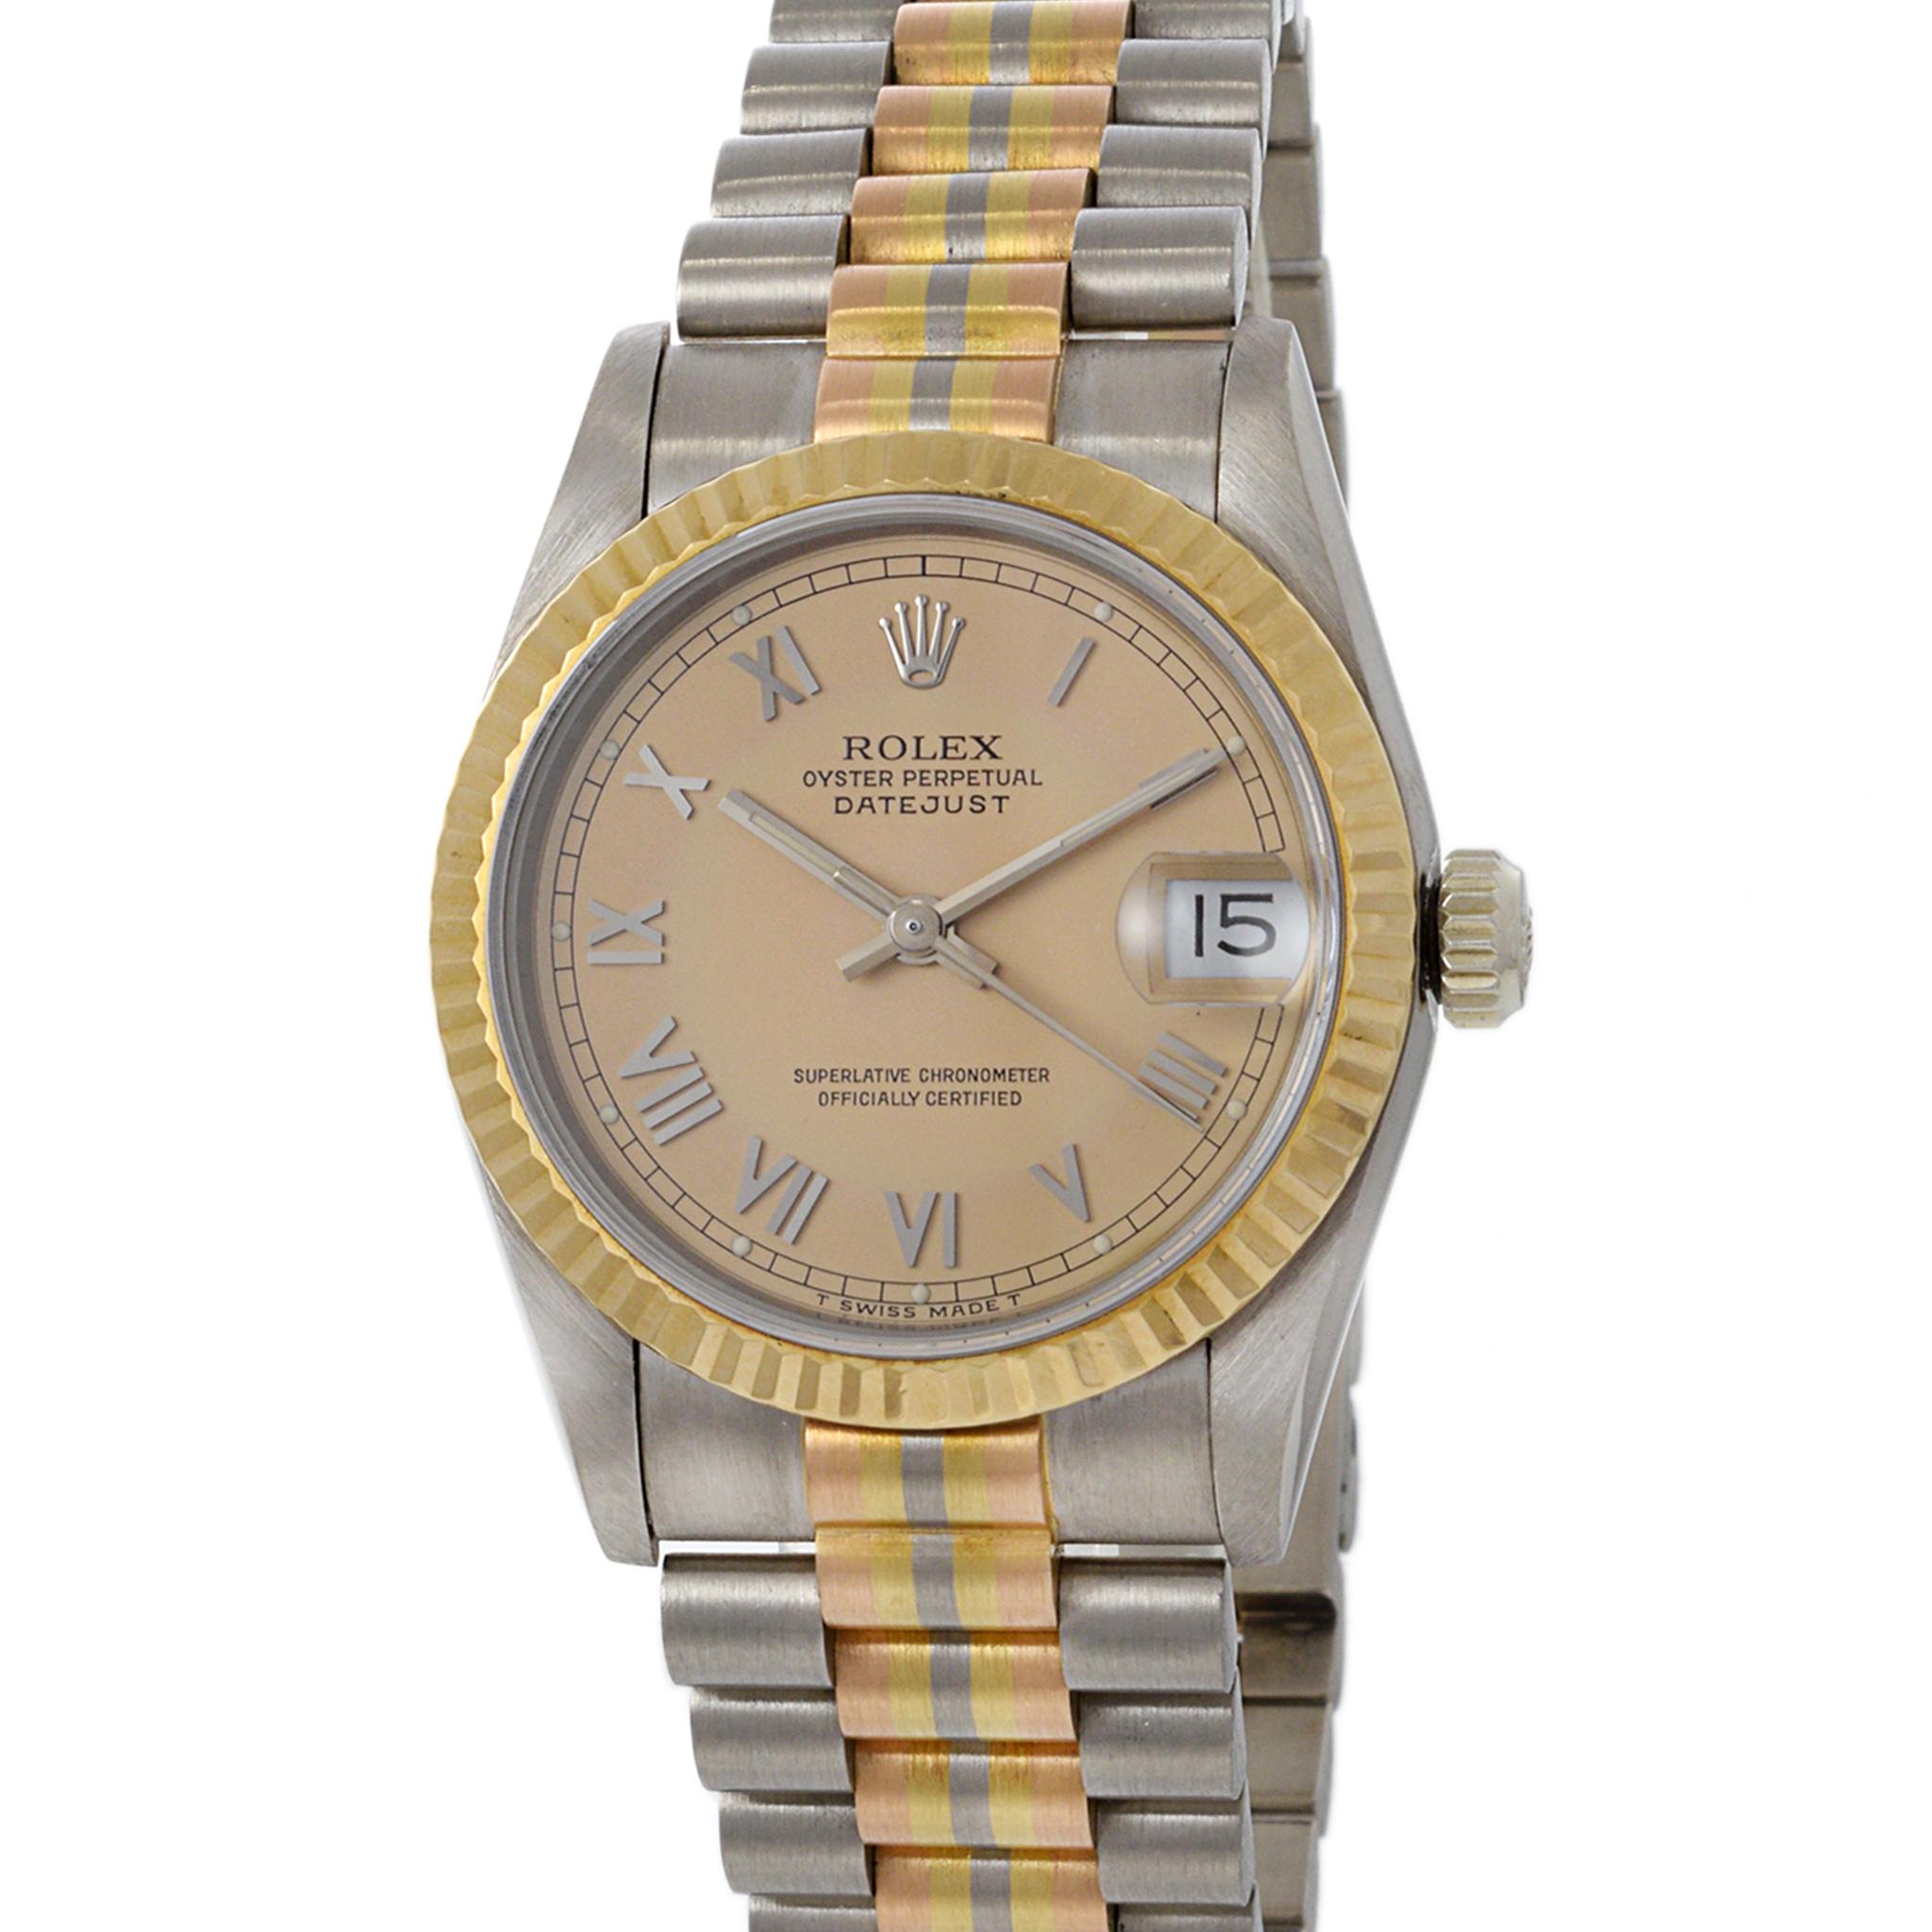 Rolex Datejust 31 Tridor 18K Yellow, White, and Rose Gold In Good Condition For Sale In New York, NY